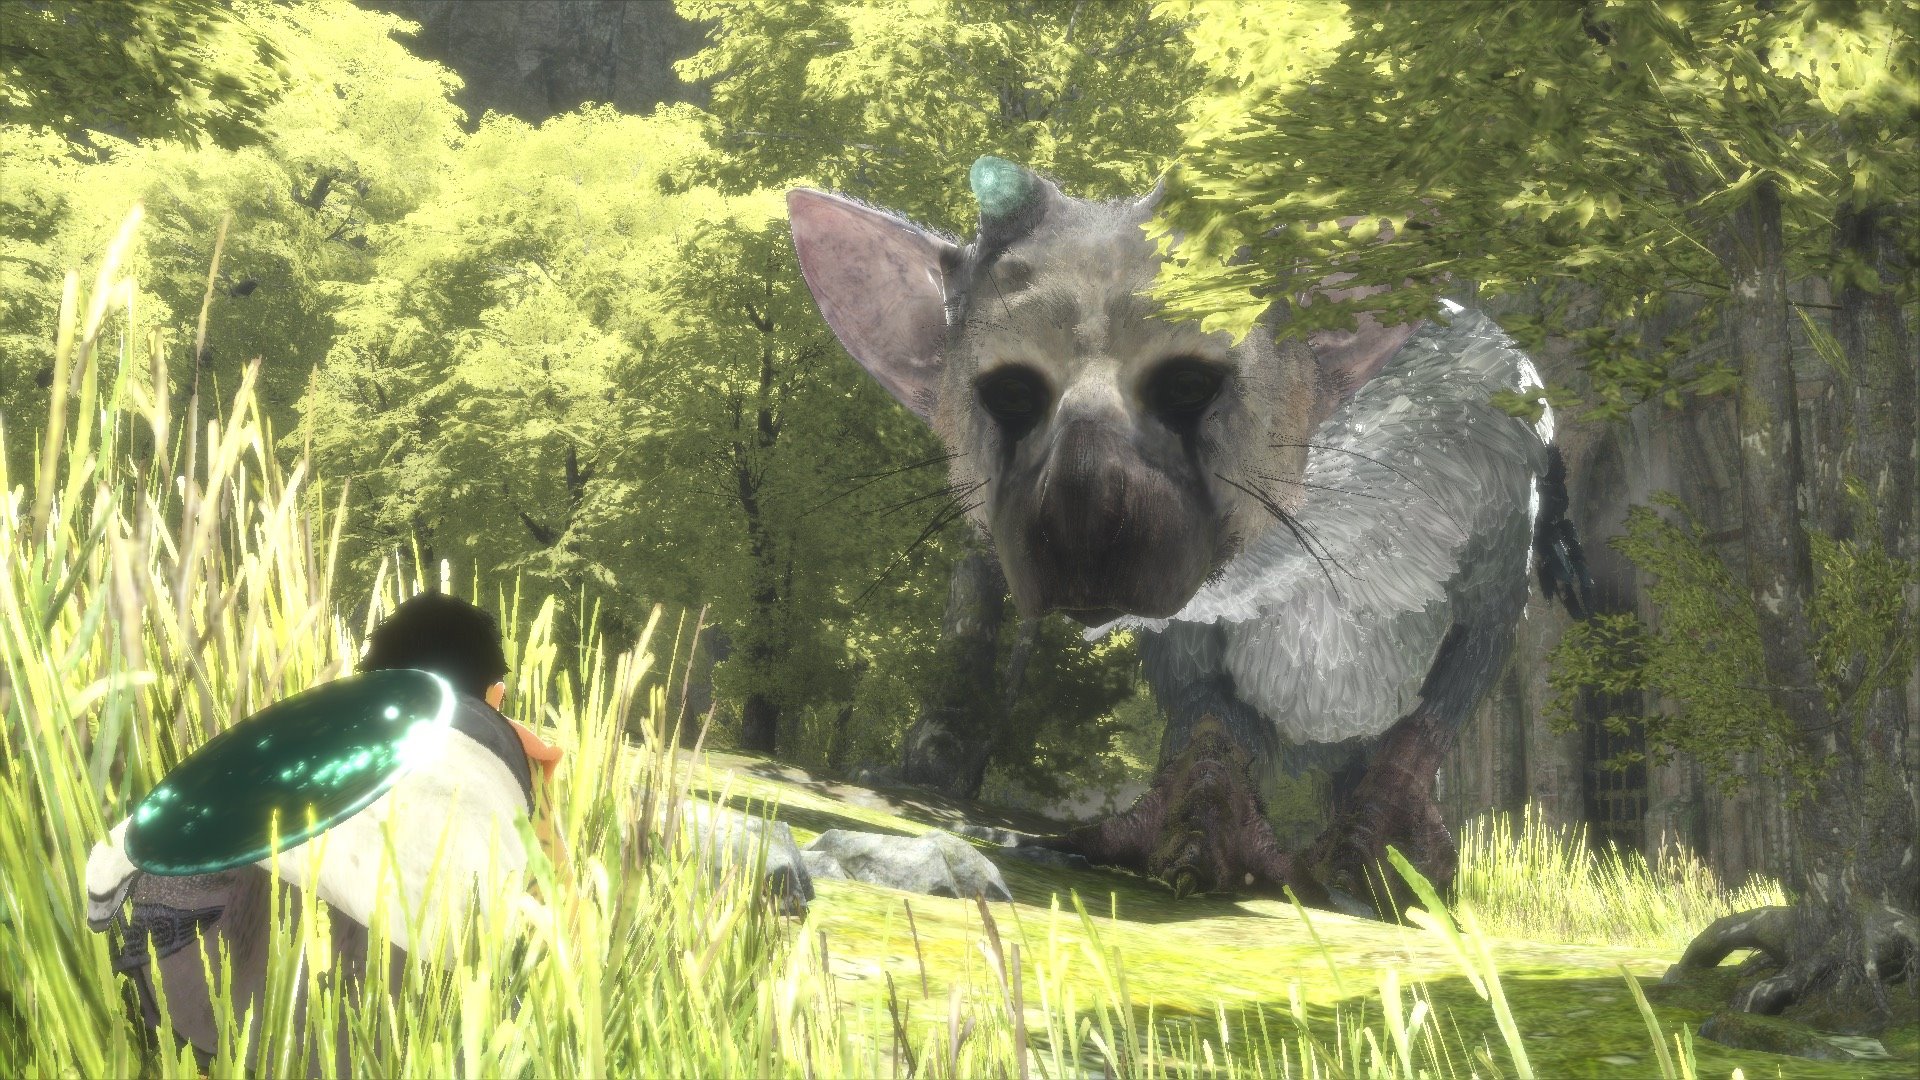 The last guardian 5 images 4 9